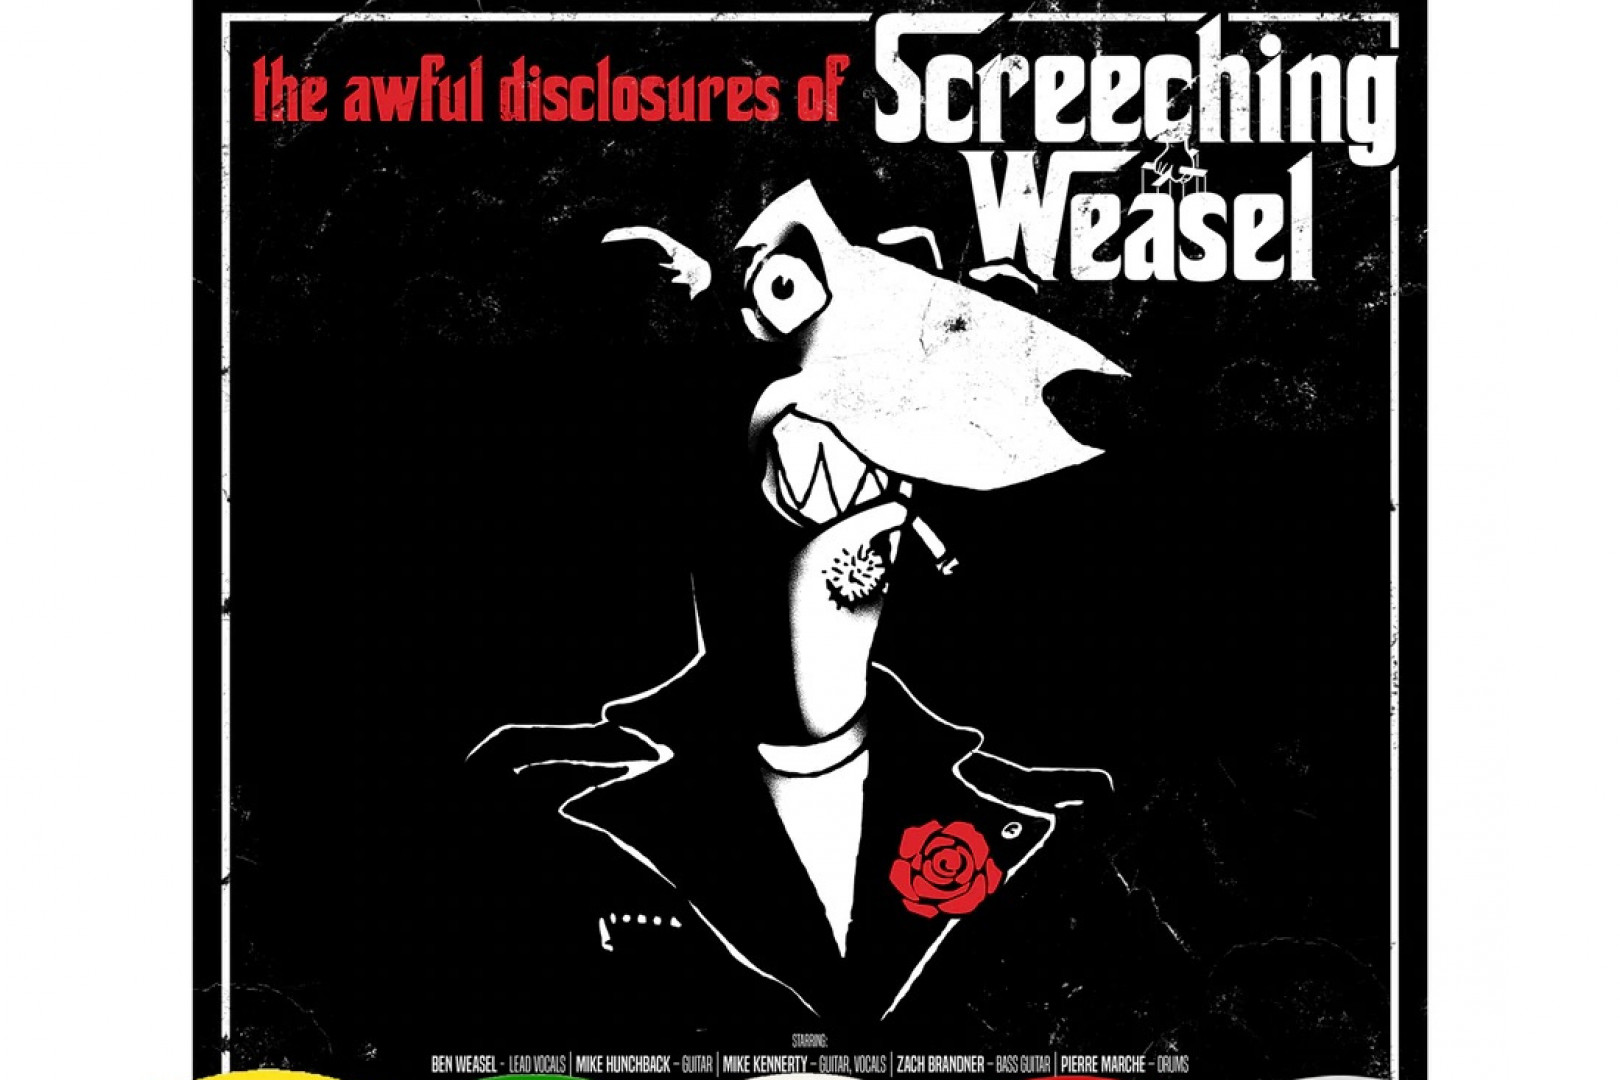 Screeching Weasel to release new album